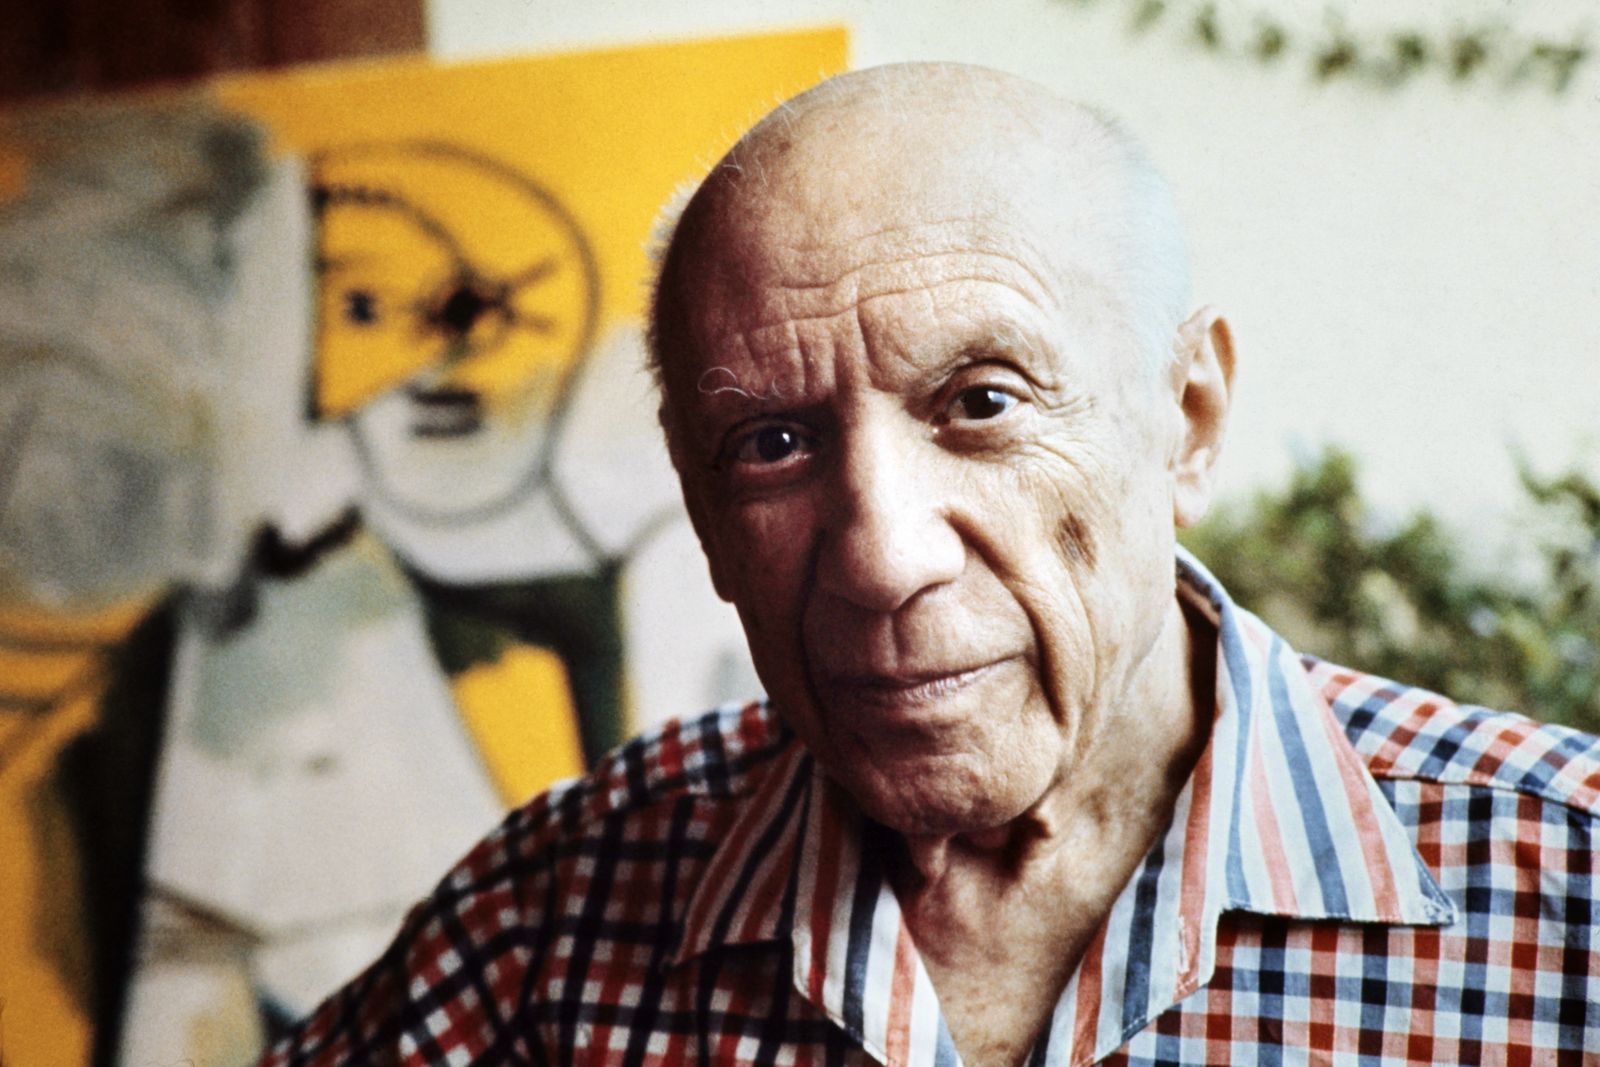 Follow Pablo Picasso's Footsteps Through Spain